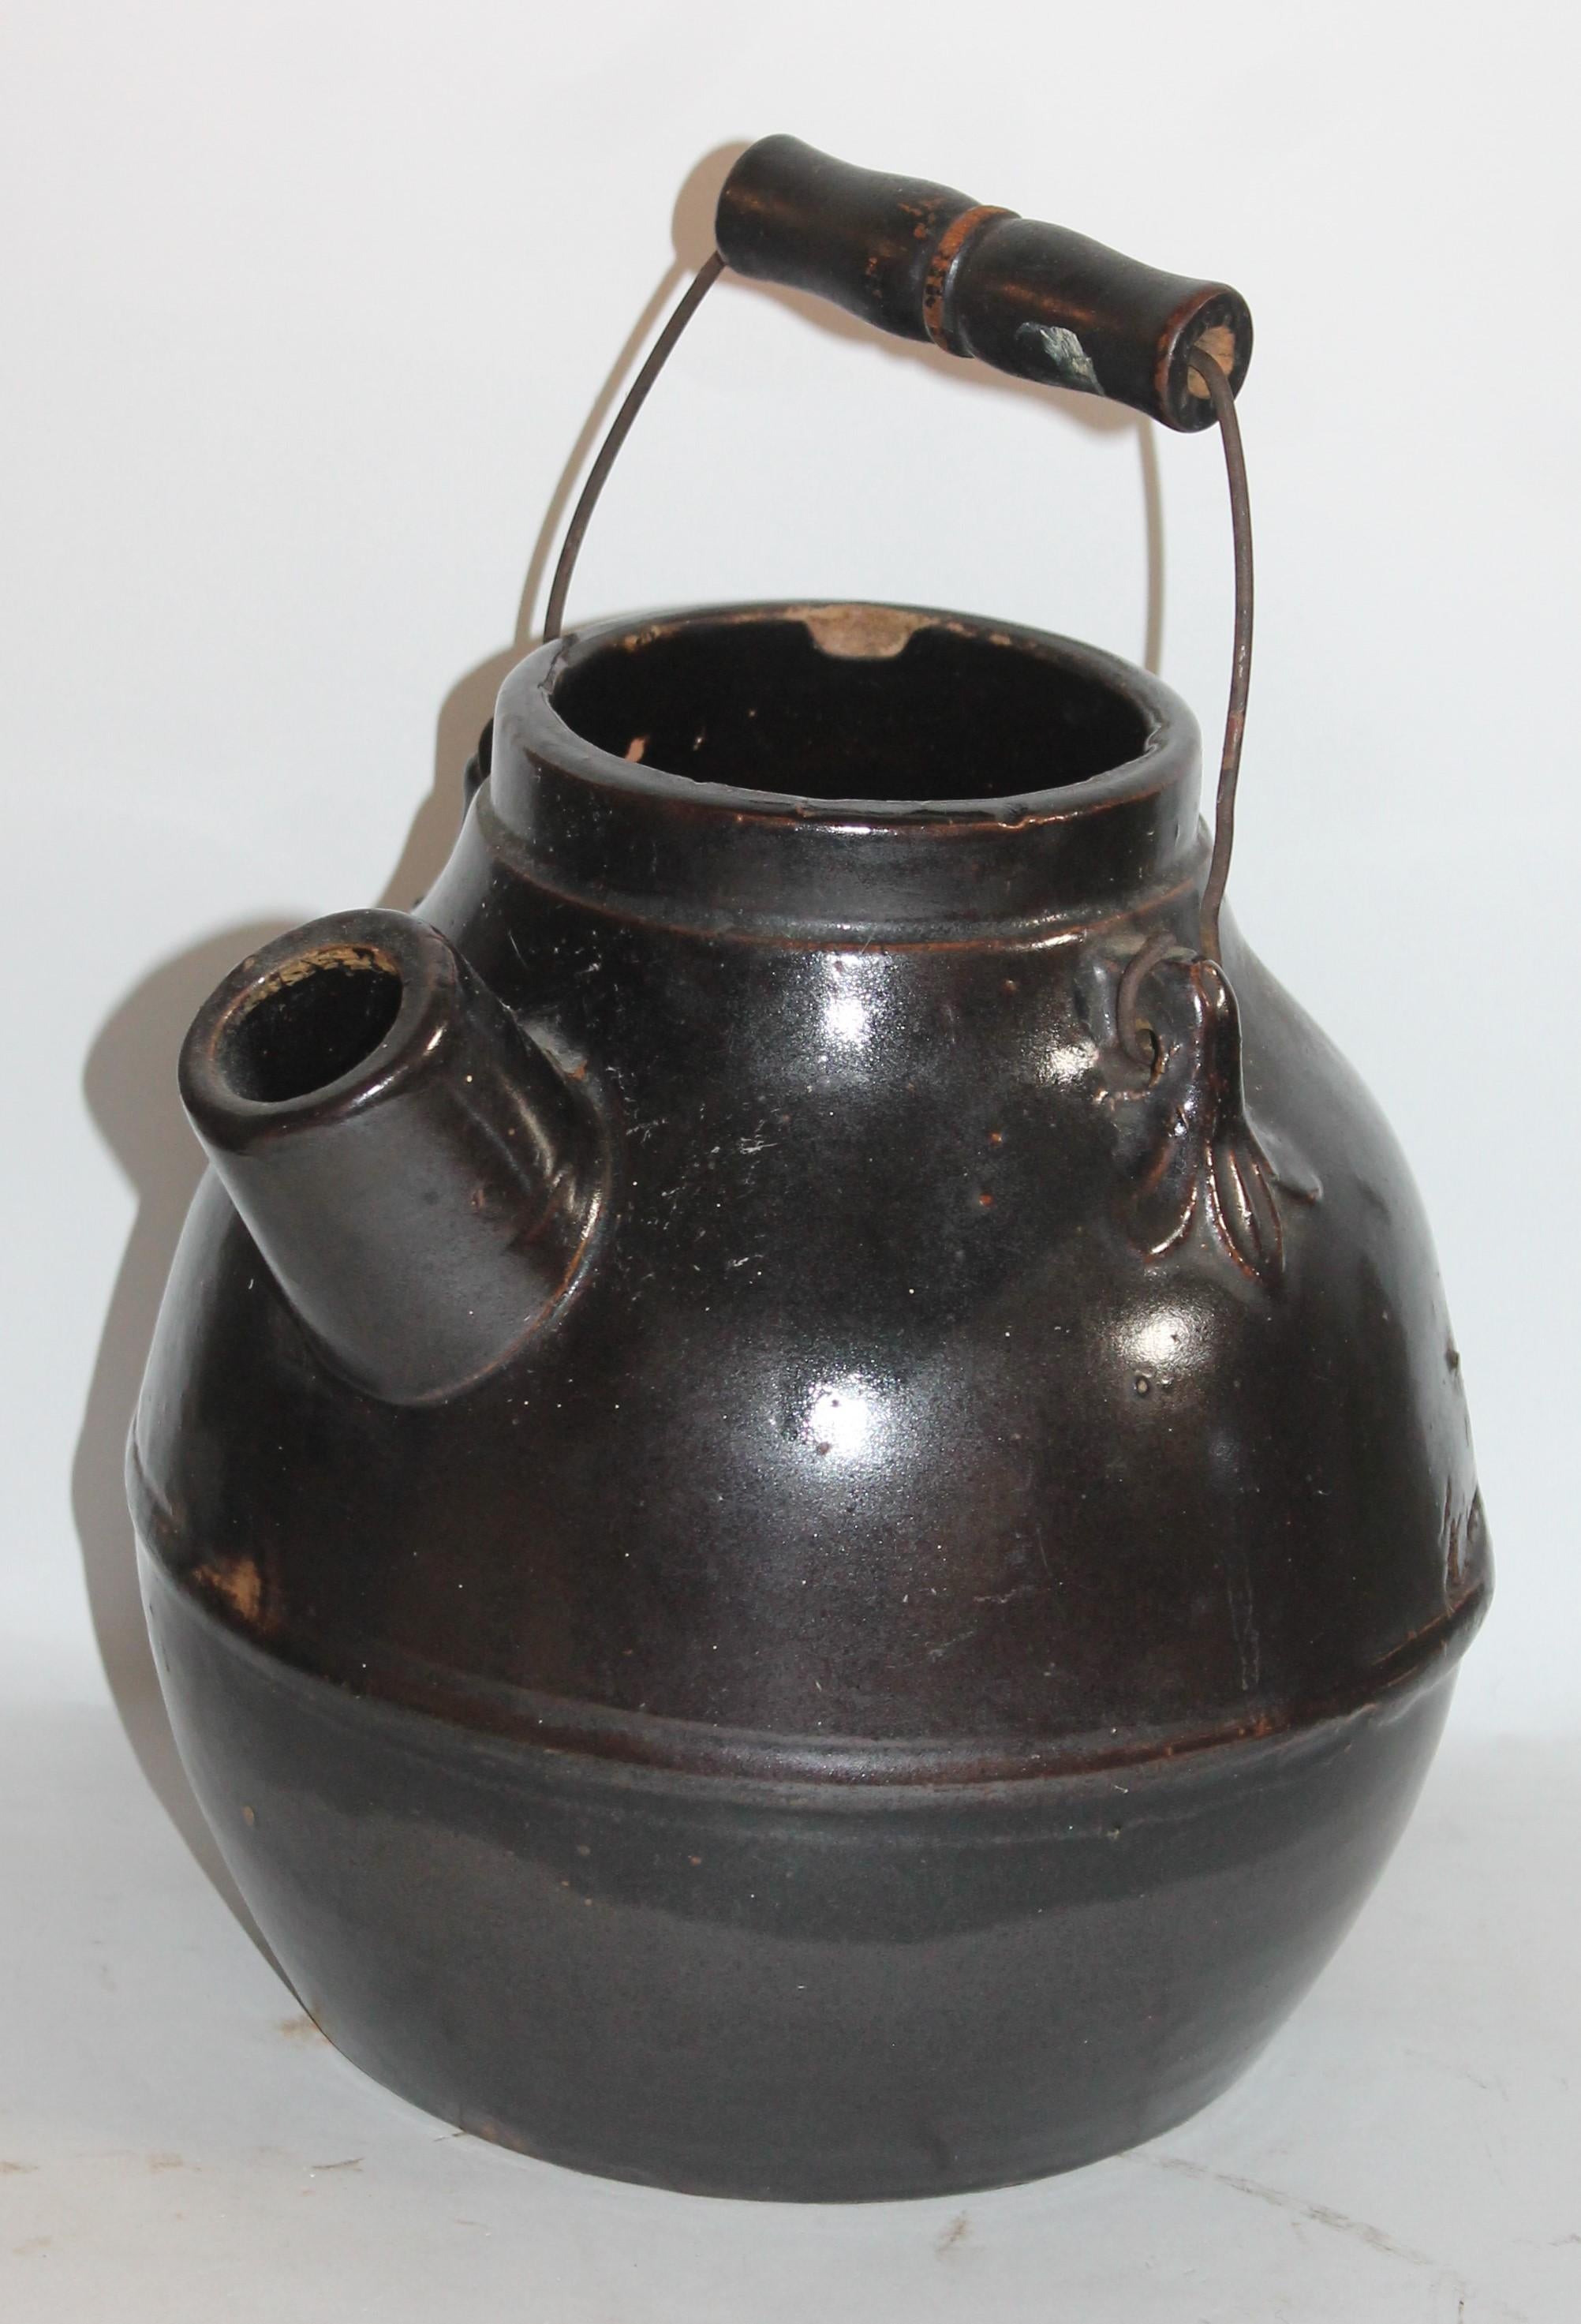 2 Pottery Batter Jugs with Original Wire Handles, 19th Century In Good Condition For Sale In Los Angeles, CA